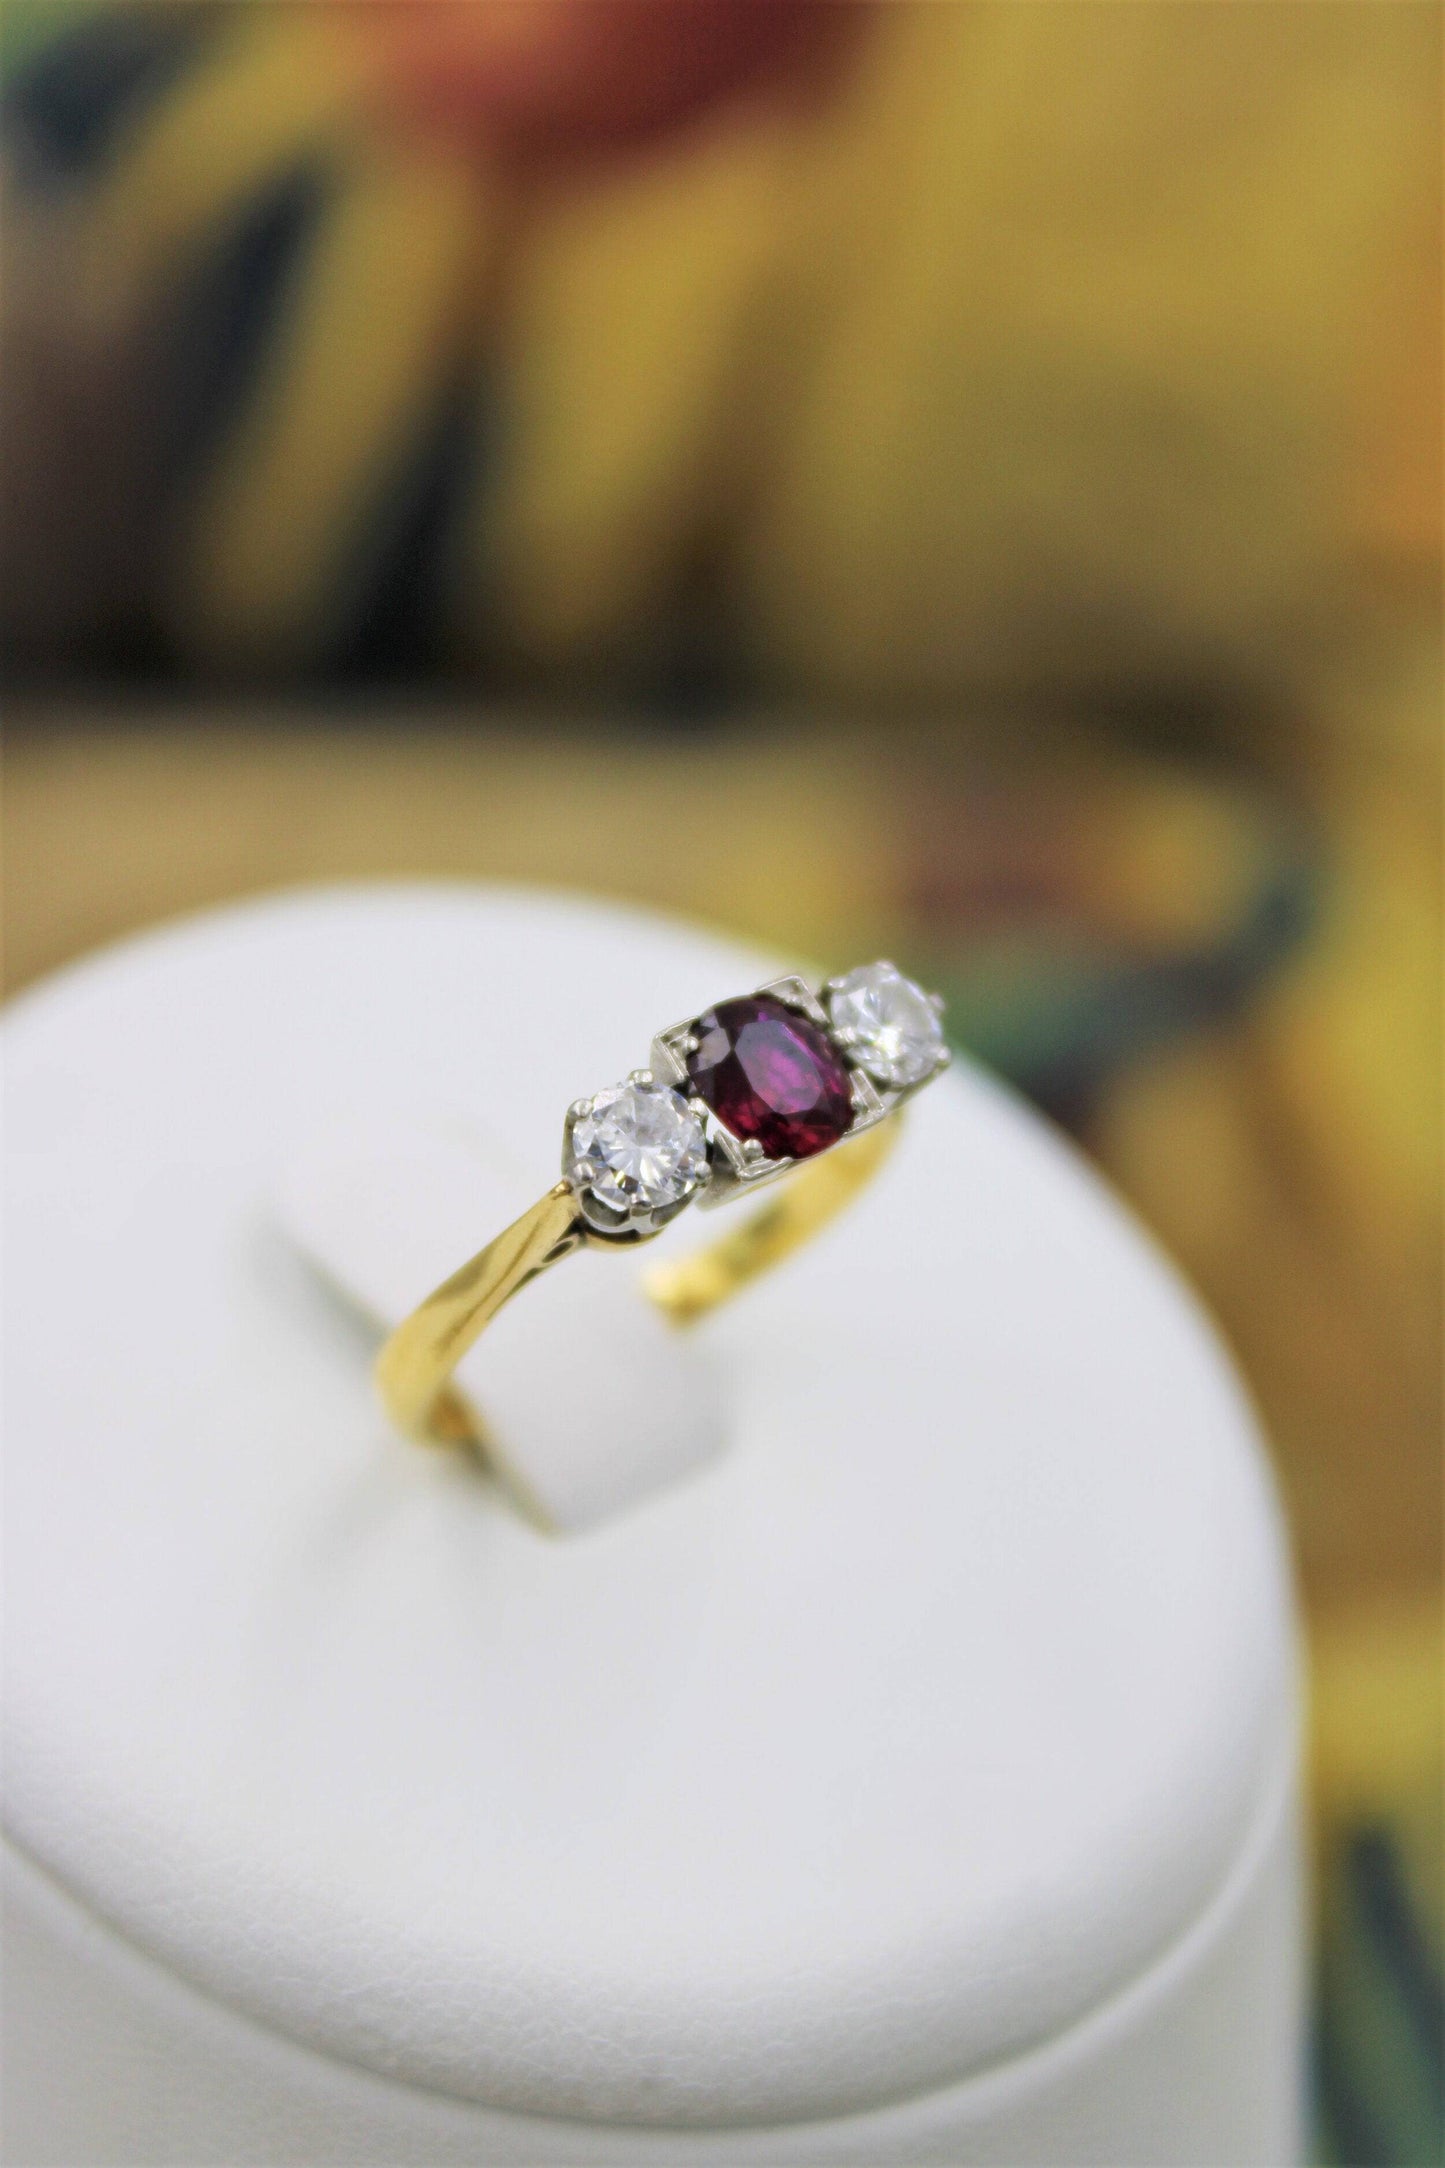 A very fine Three Stone Ruby & Diamond Ring mounted in 18ct Yellow Gold & Platinum, Circa 1950 - Robin Haydock Antiques